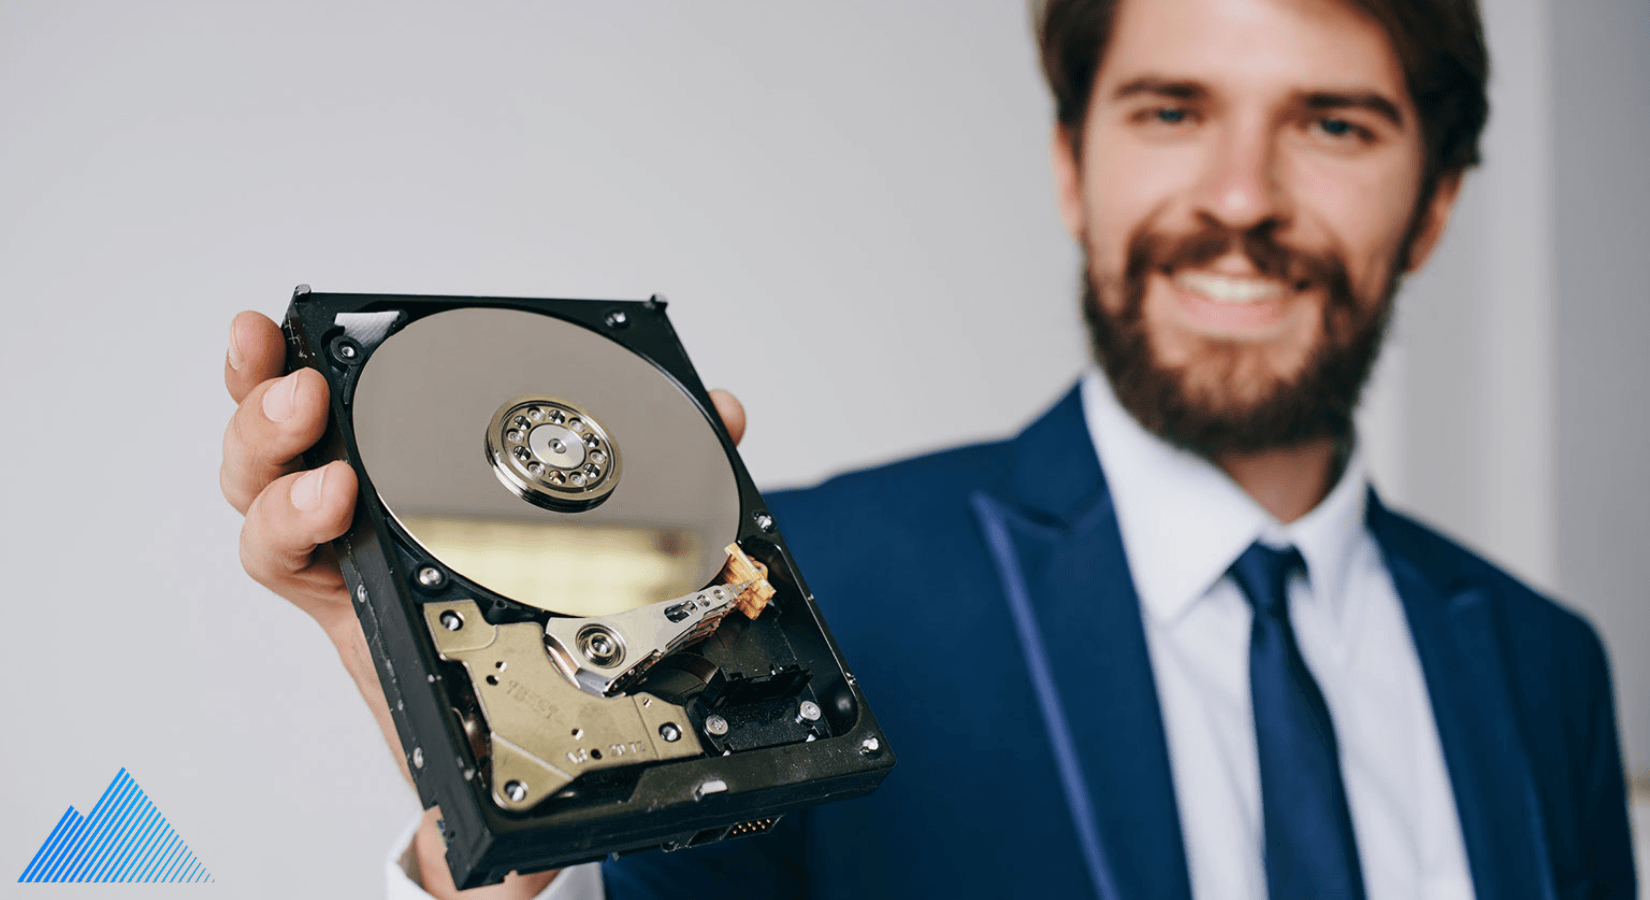 Man in a suit holding a hard drive